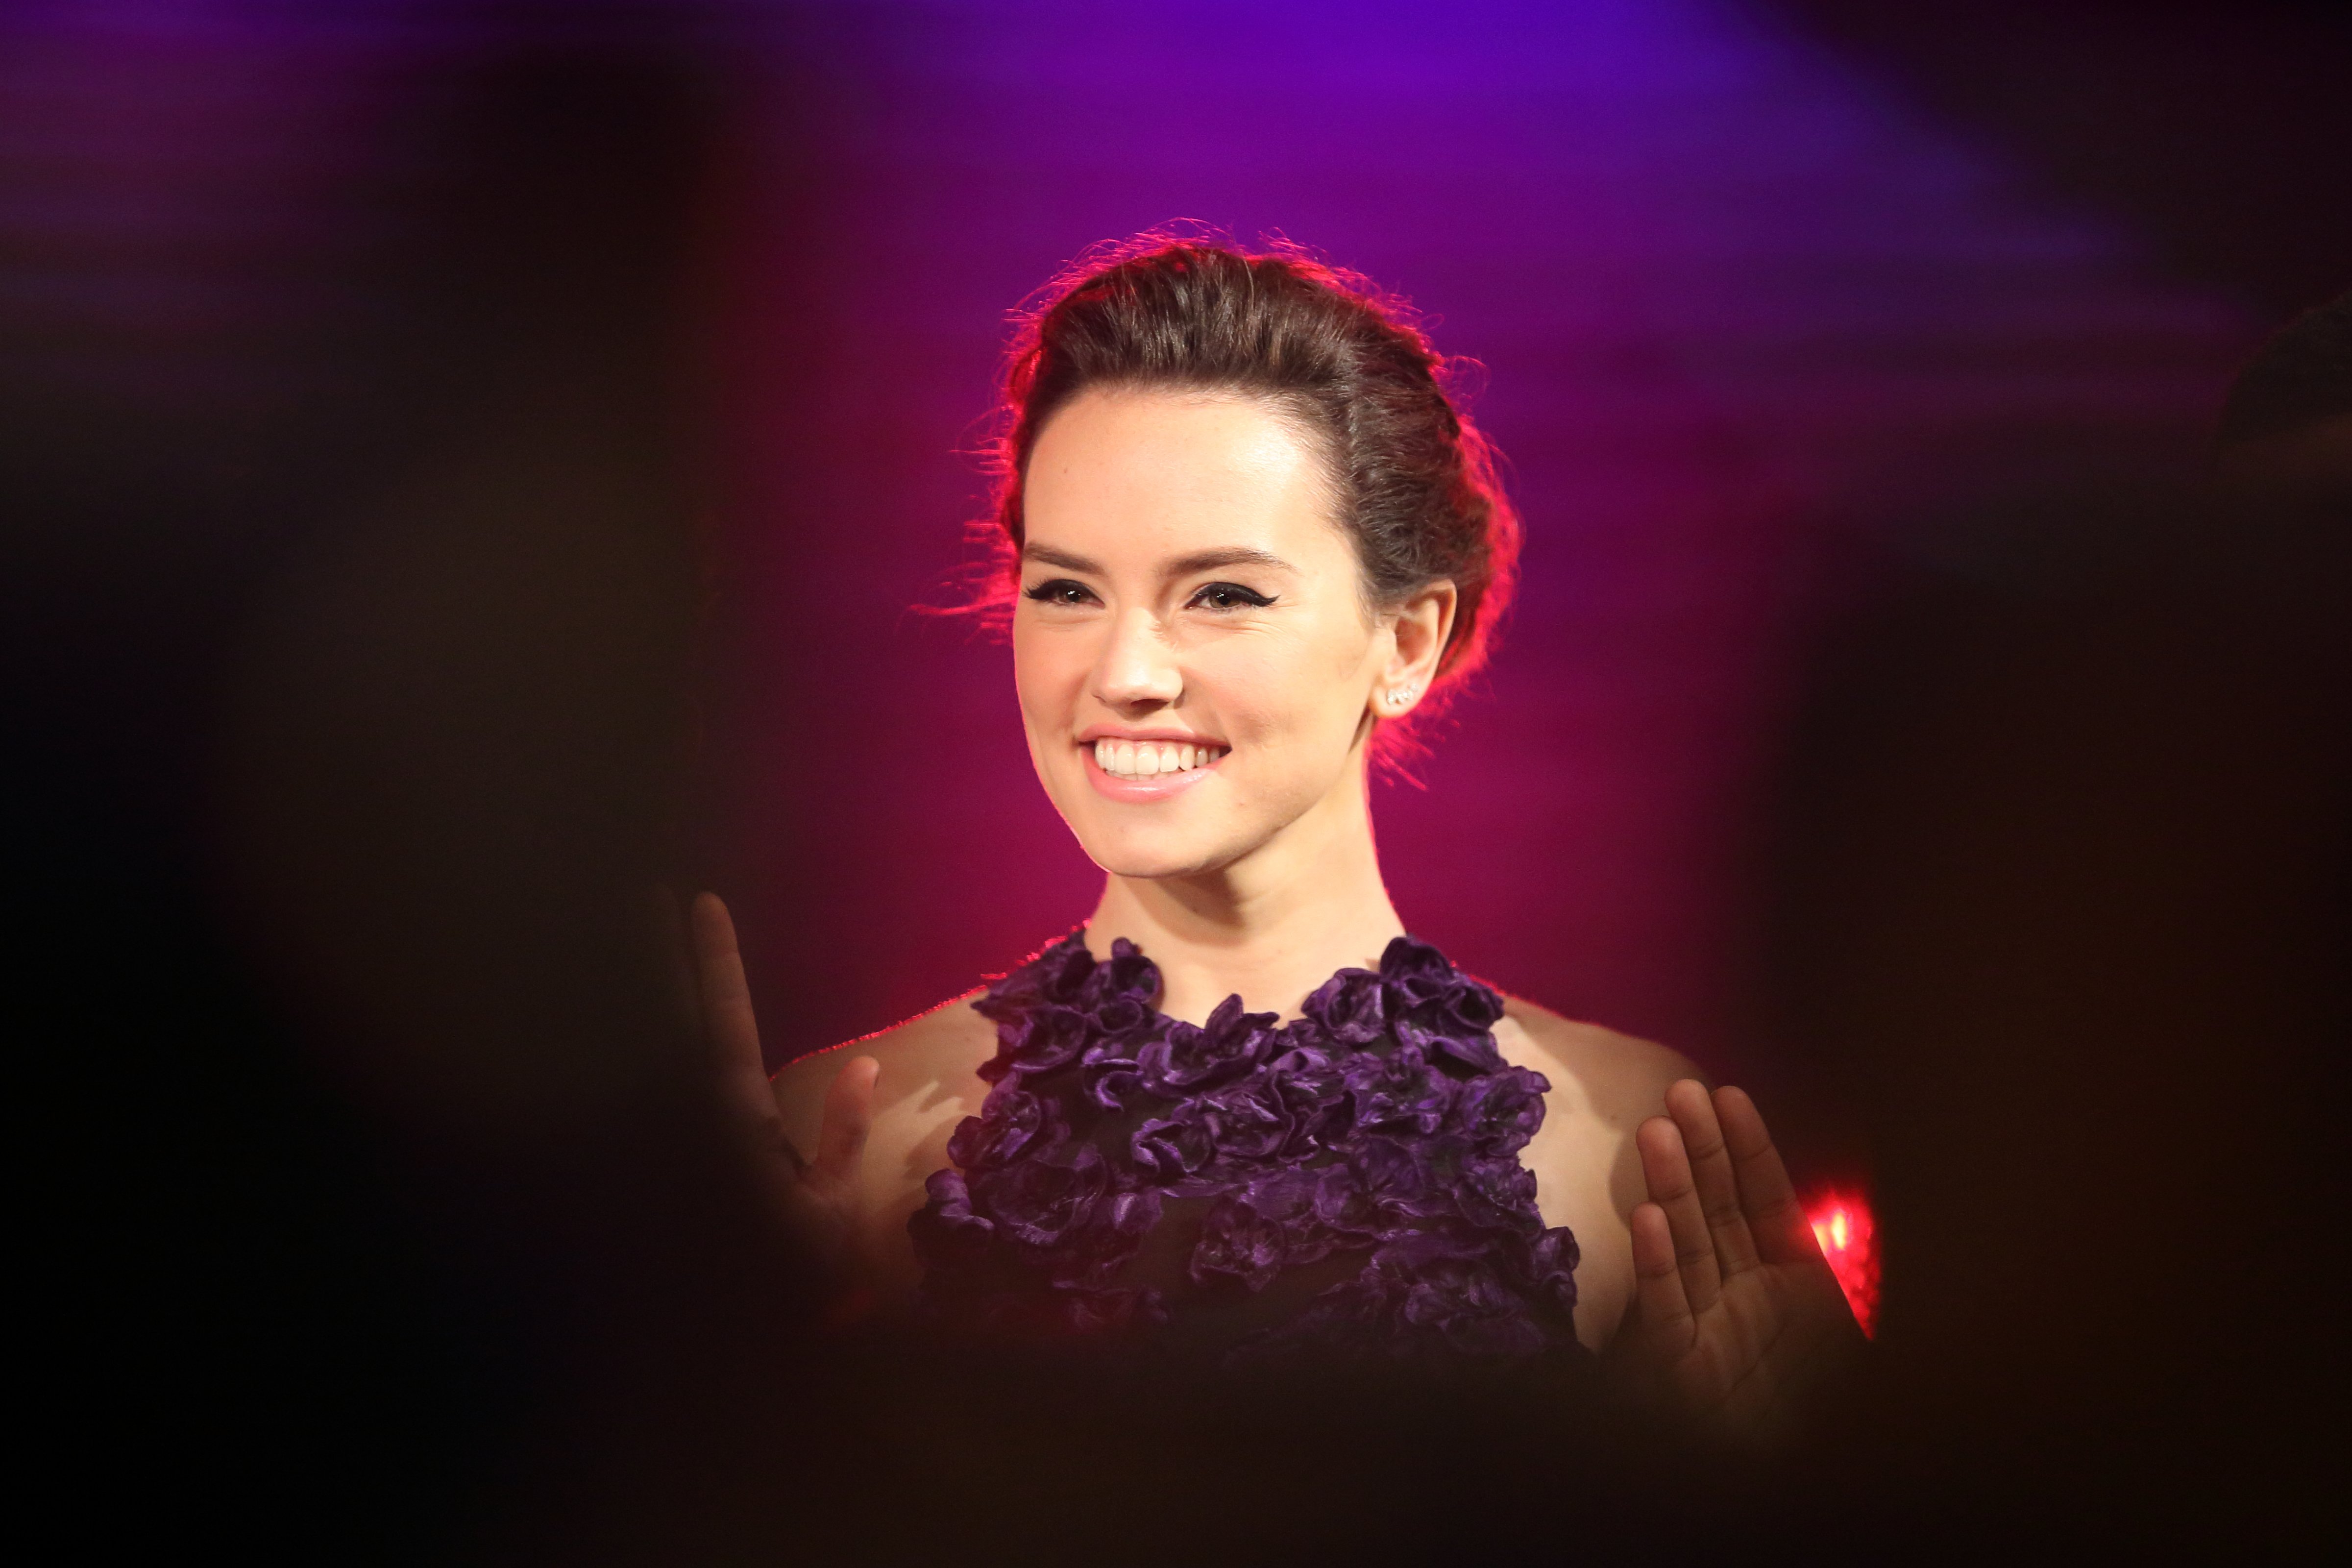 Actress Daisy Ridley attends "Star Wars: The Force Awakens" premiere at Shanghai Grand Theatre on Dec. 27, 2015 in Shanghai, China. (ChinaFotoPress/Getty Images)